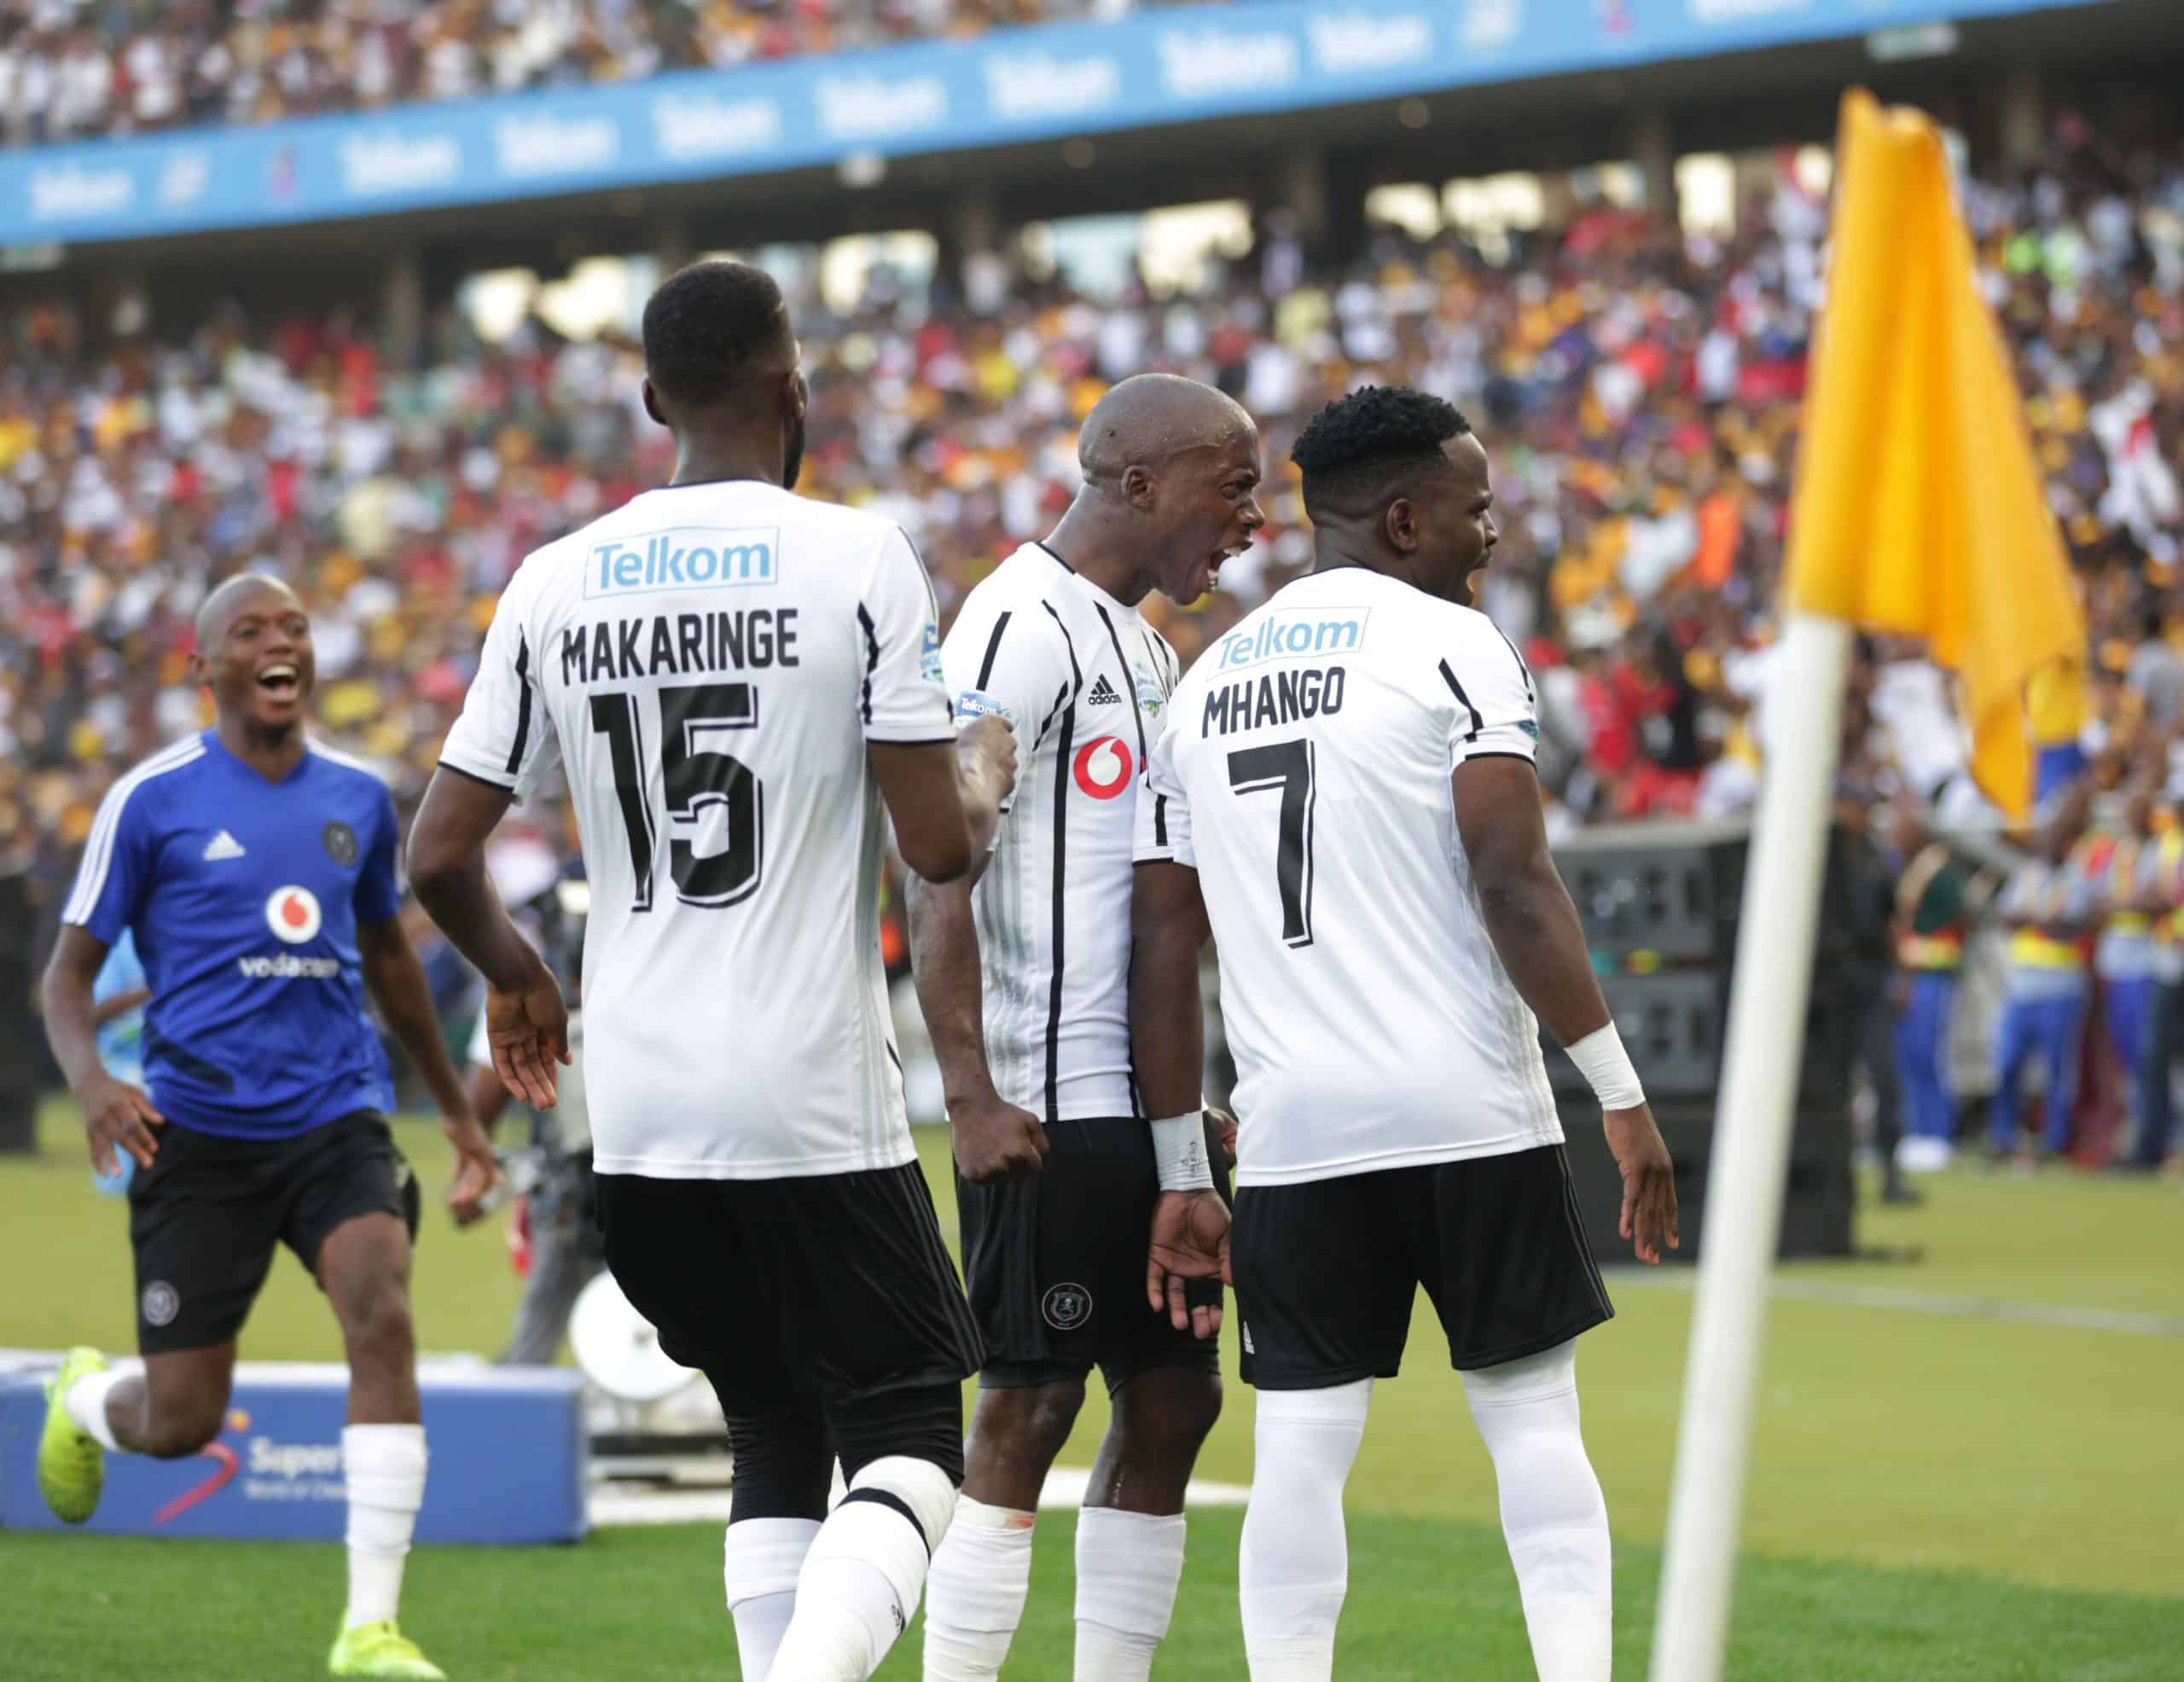 You are currently viewing Five Pirates players who could hurt Chiefs in Soweto derby